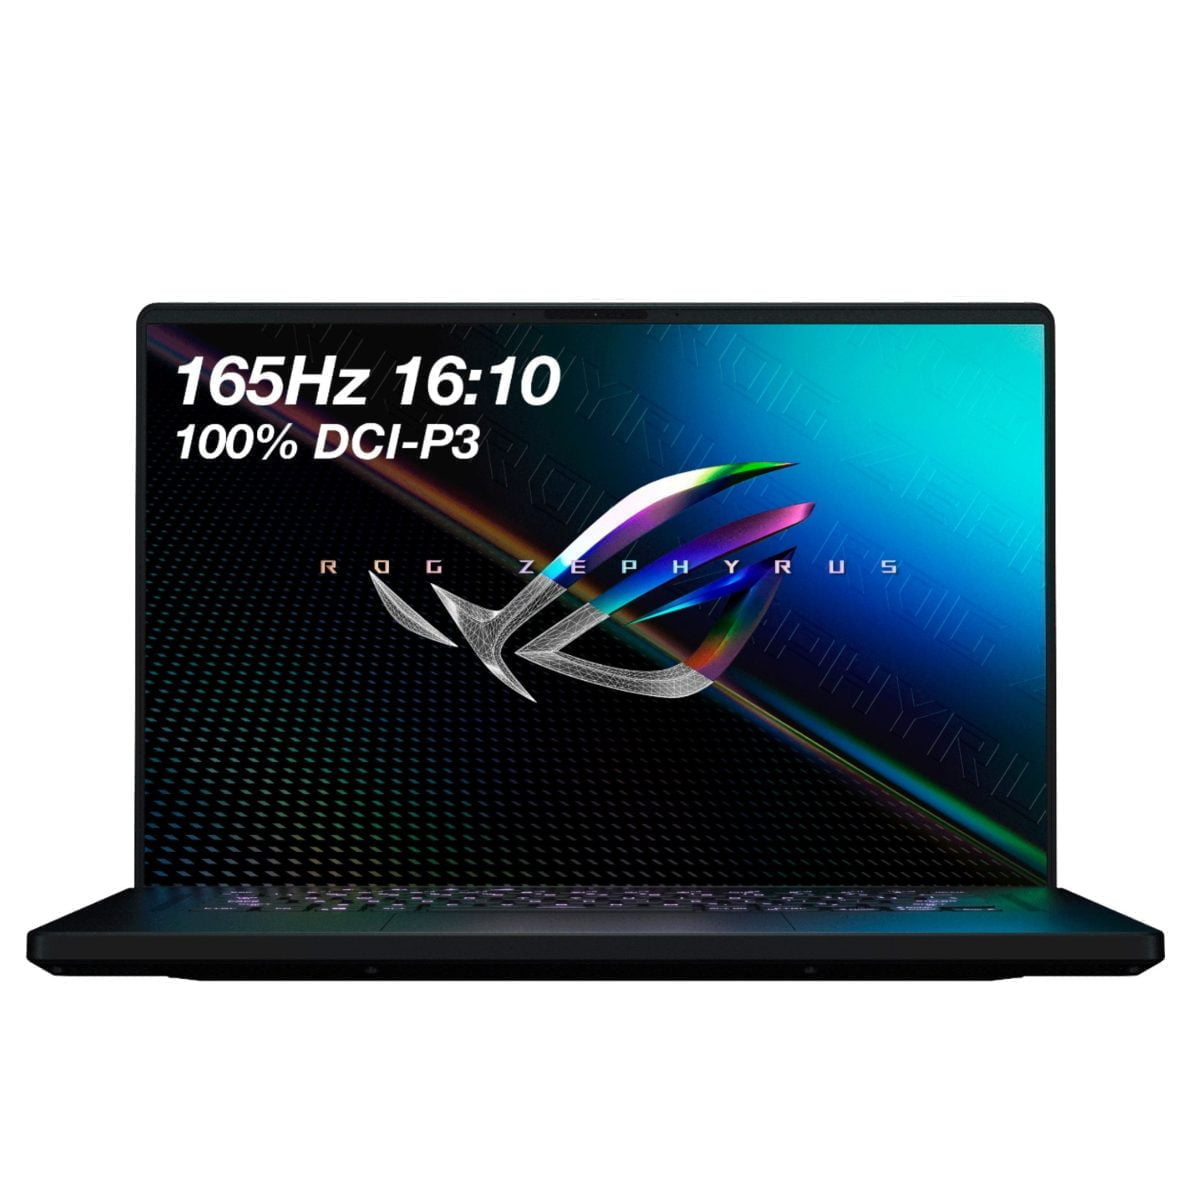 6464203 Sd Asus &Amp;Lt;H1 Class=&Amp;Quot;Heading-5 V-Fw-Regular&Amp;Quot;&Amp;Gt;Asus - Rog 16&Amp;Quot; Wuxga 144Hz Gaming Laptop - Intel Core I7 - 16Gb Memory - Nvidia Rtx3050Ti - 512Gb Ssd&Amp;Lt;/H1&Amp;Gt; Asus Rog Gaming Laptop. Enjoy Everyday Gaming With This Asus Notebook Pc. The 11Th Gen Intel Core I7 Processor And 16Gb Of Ram Let You Run Graphics-Heavy Games Smoothly, While The Potent Nvidia Rtx3050Ti Graphics Produce High-Quality Visuals On The New Fast 16-Inch 144Hz Wuxga Display. This Asus Notebook Pc Has 512Gb Ssd That Shortens Load Times And Offers Ample Storage. Asus Rog Gaming Laptop Asus - Rog 16&Amp;Quot; Wuxga 144Hz Gaming Laptop - Intel Core I7 - 16Gb Memory - Nvidia Rtx3050Ti - 512Gb Ssd